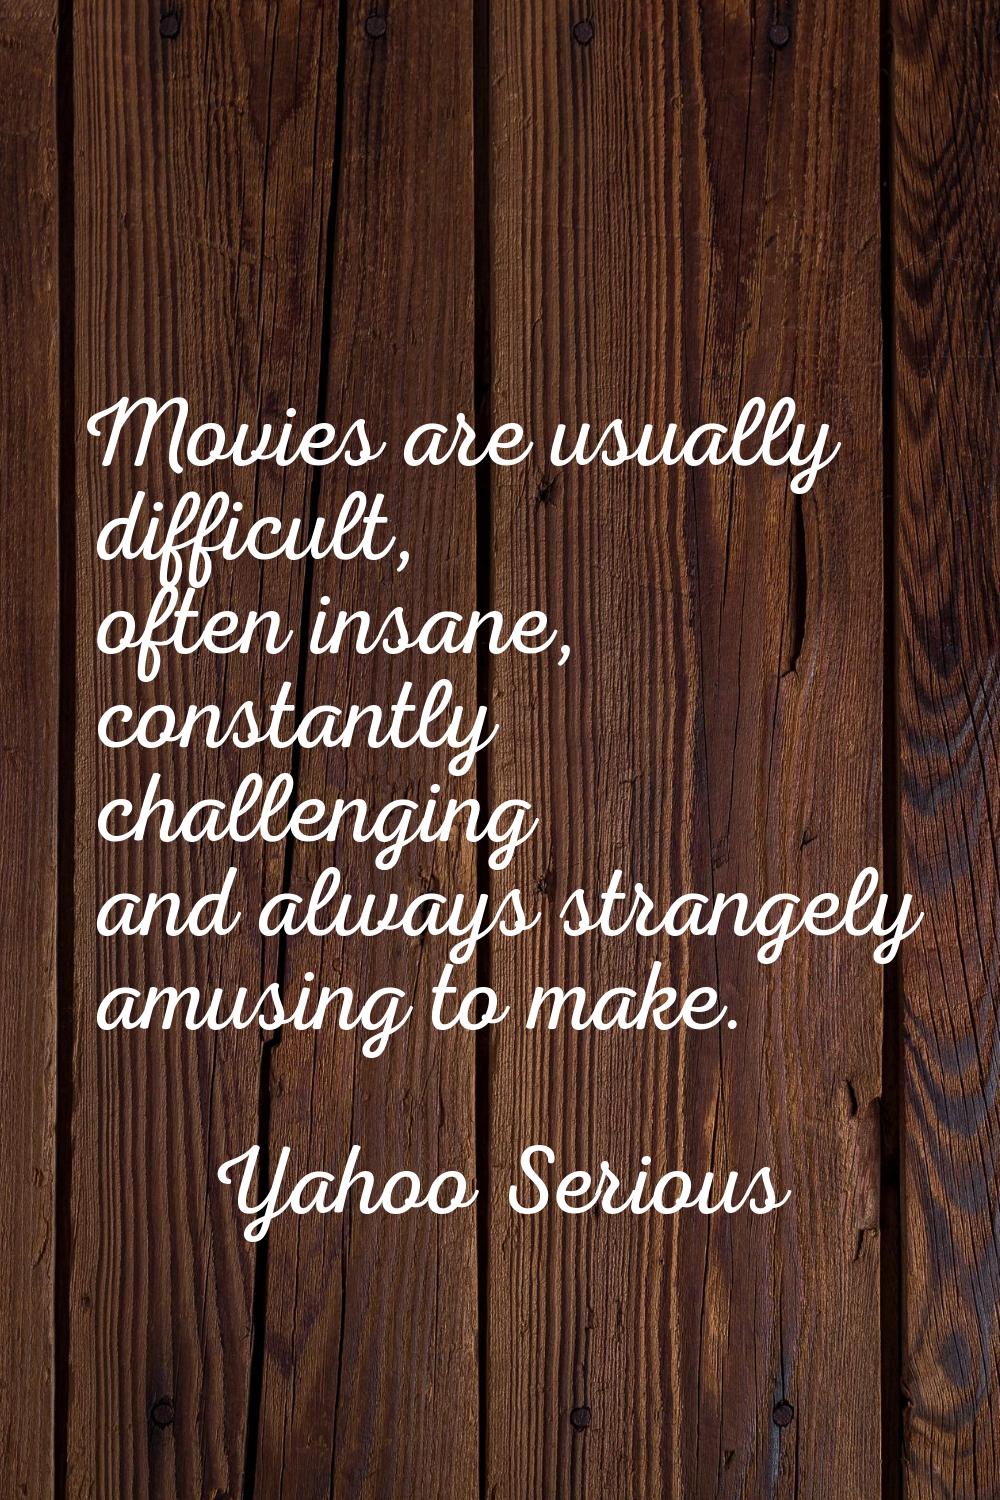 Movies are usually difficult, often insane, constantly challenging and always strangely amusing to 